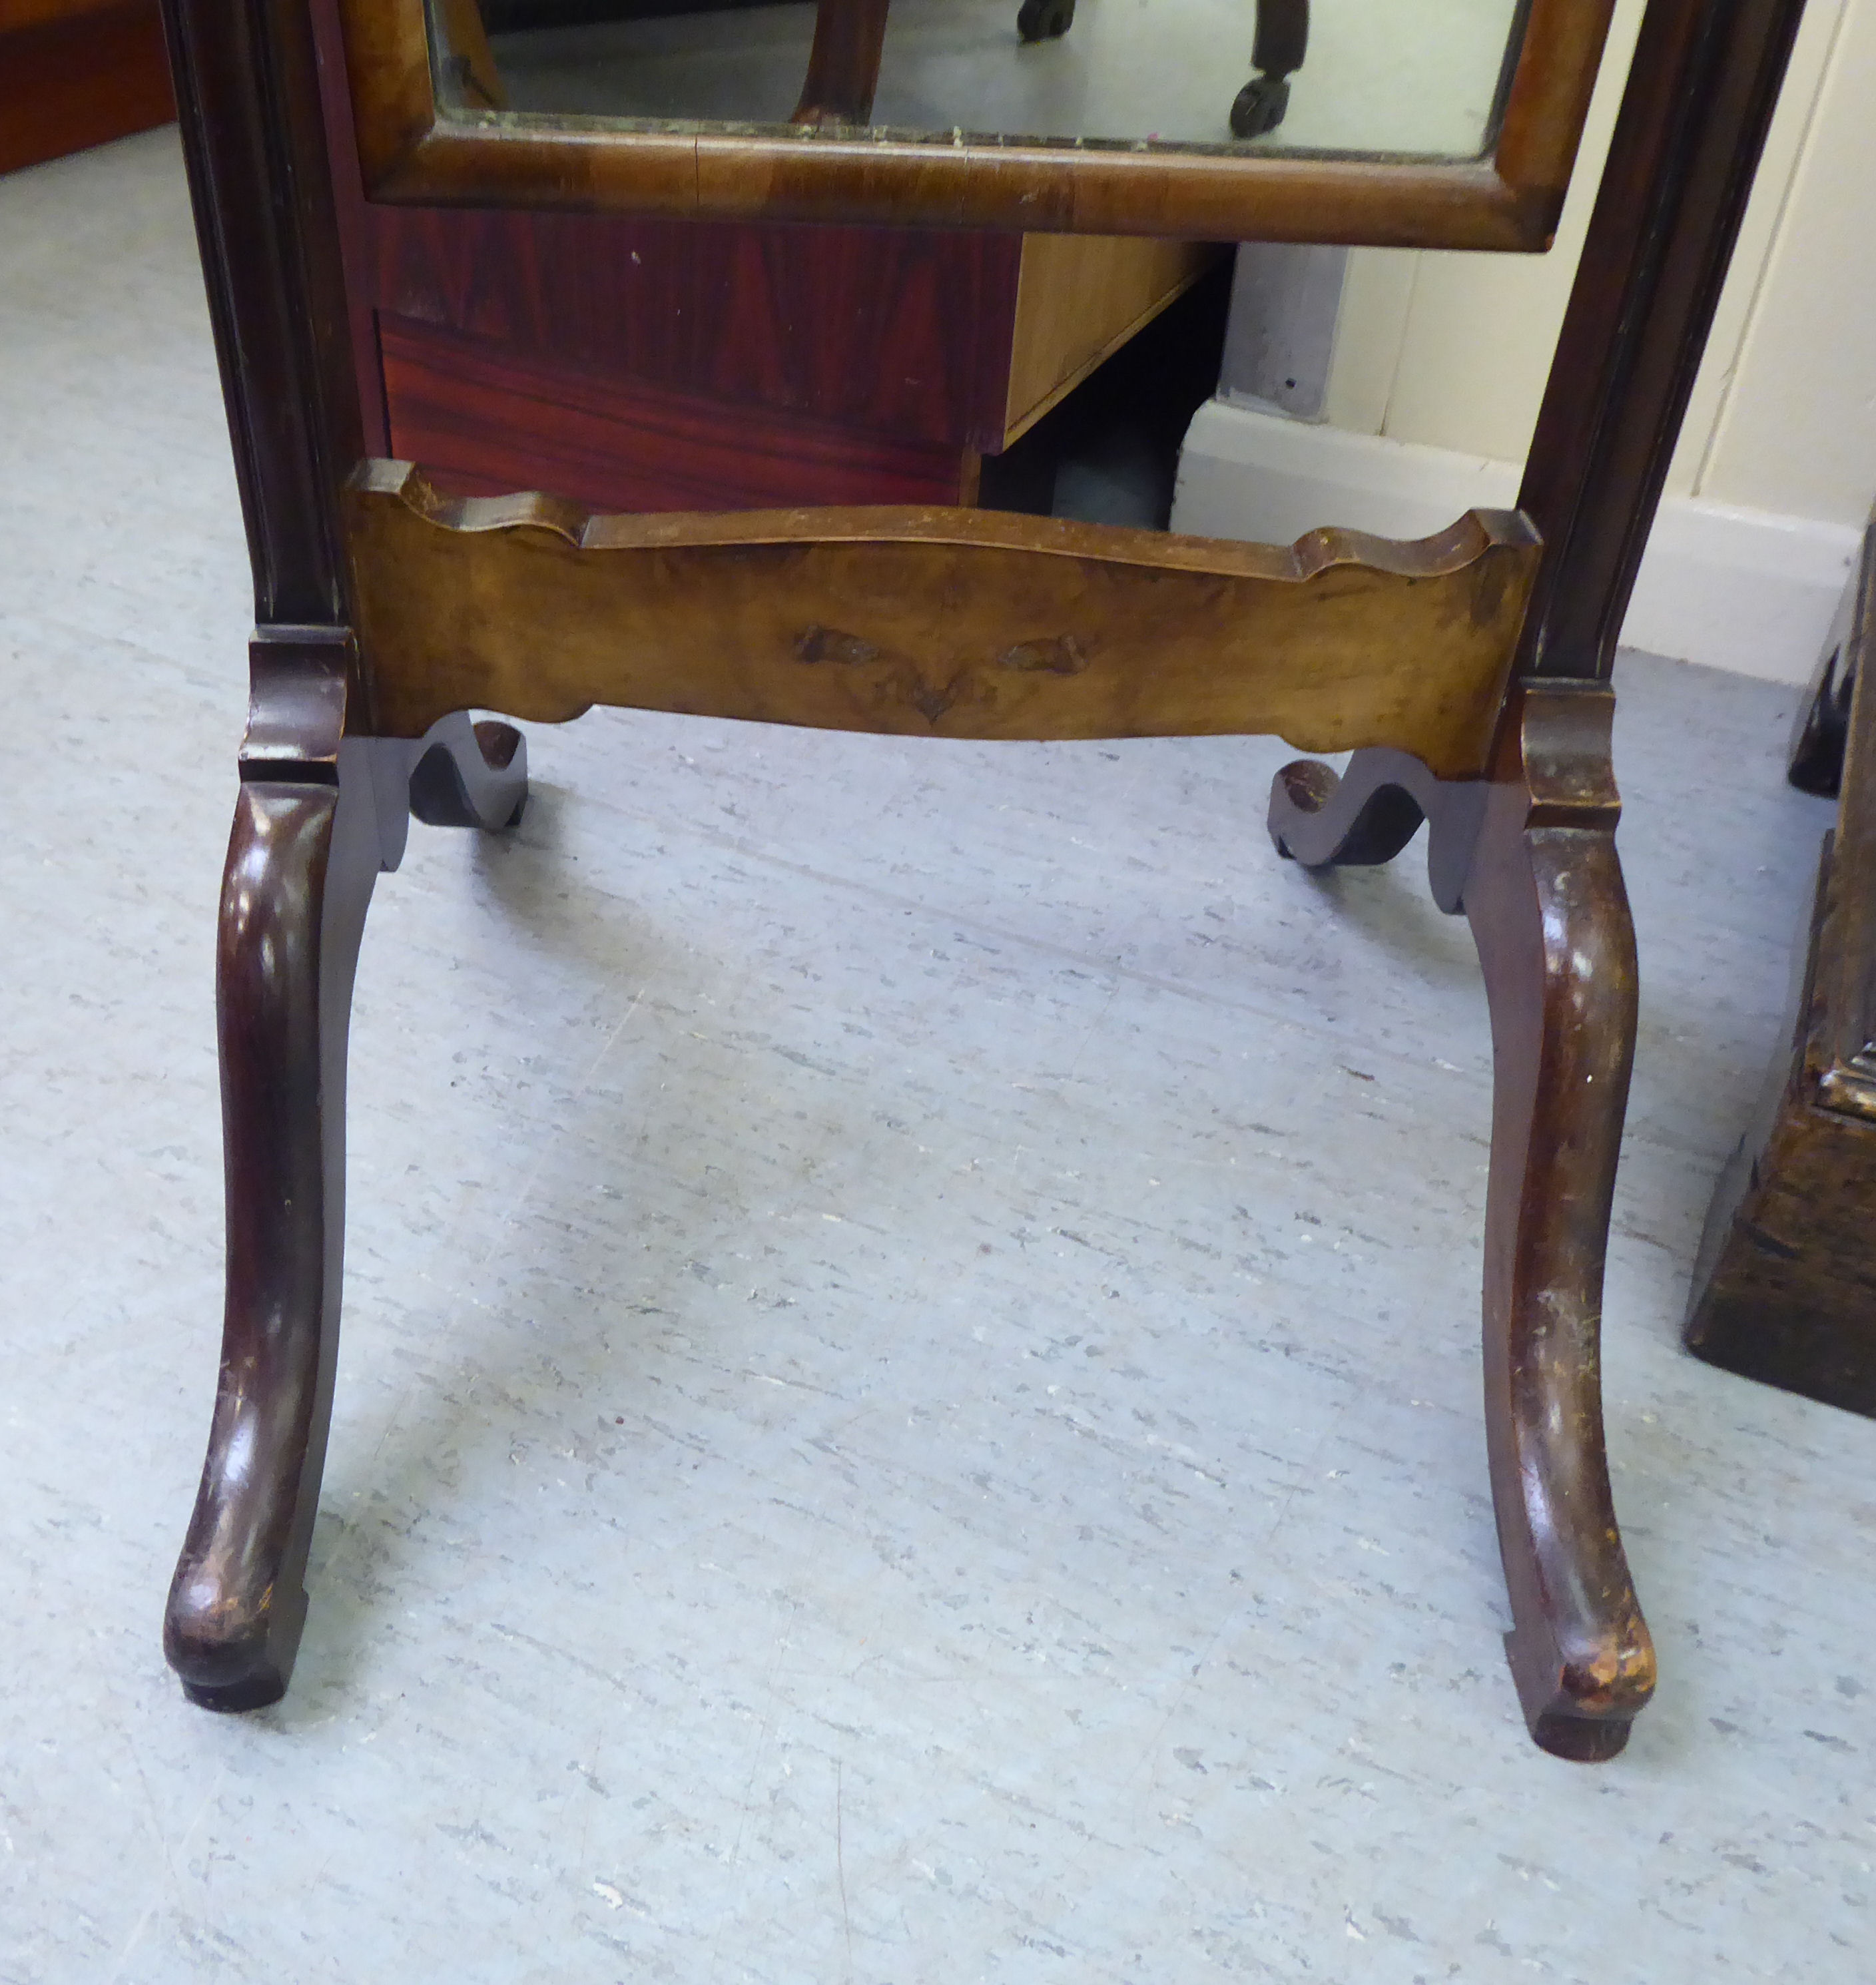 An Edwardian mahogany framed cheval mirror, raised on splayed legs  62"h  16"w - Image 4 of 4